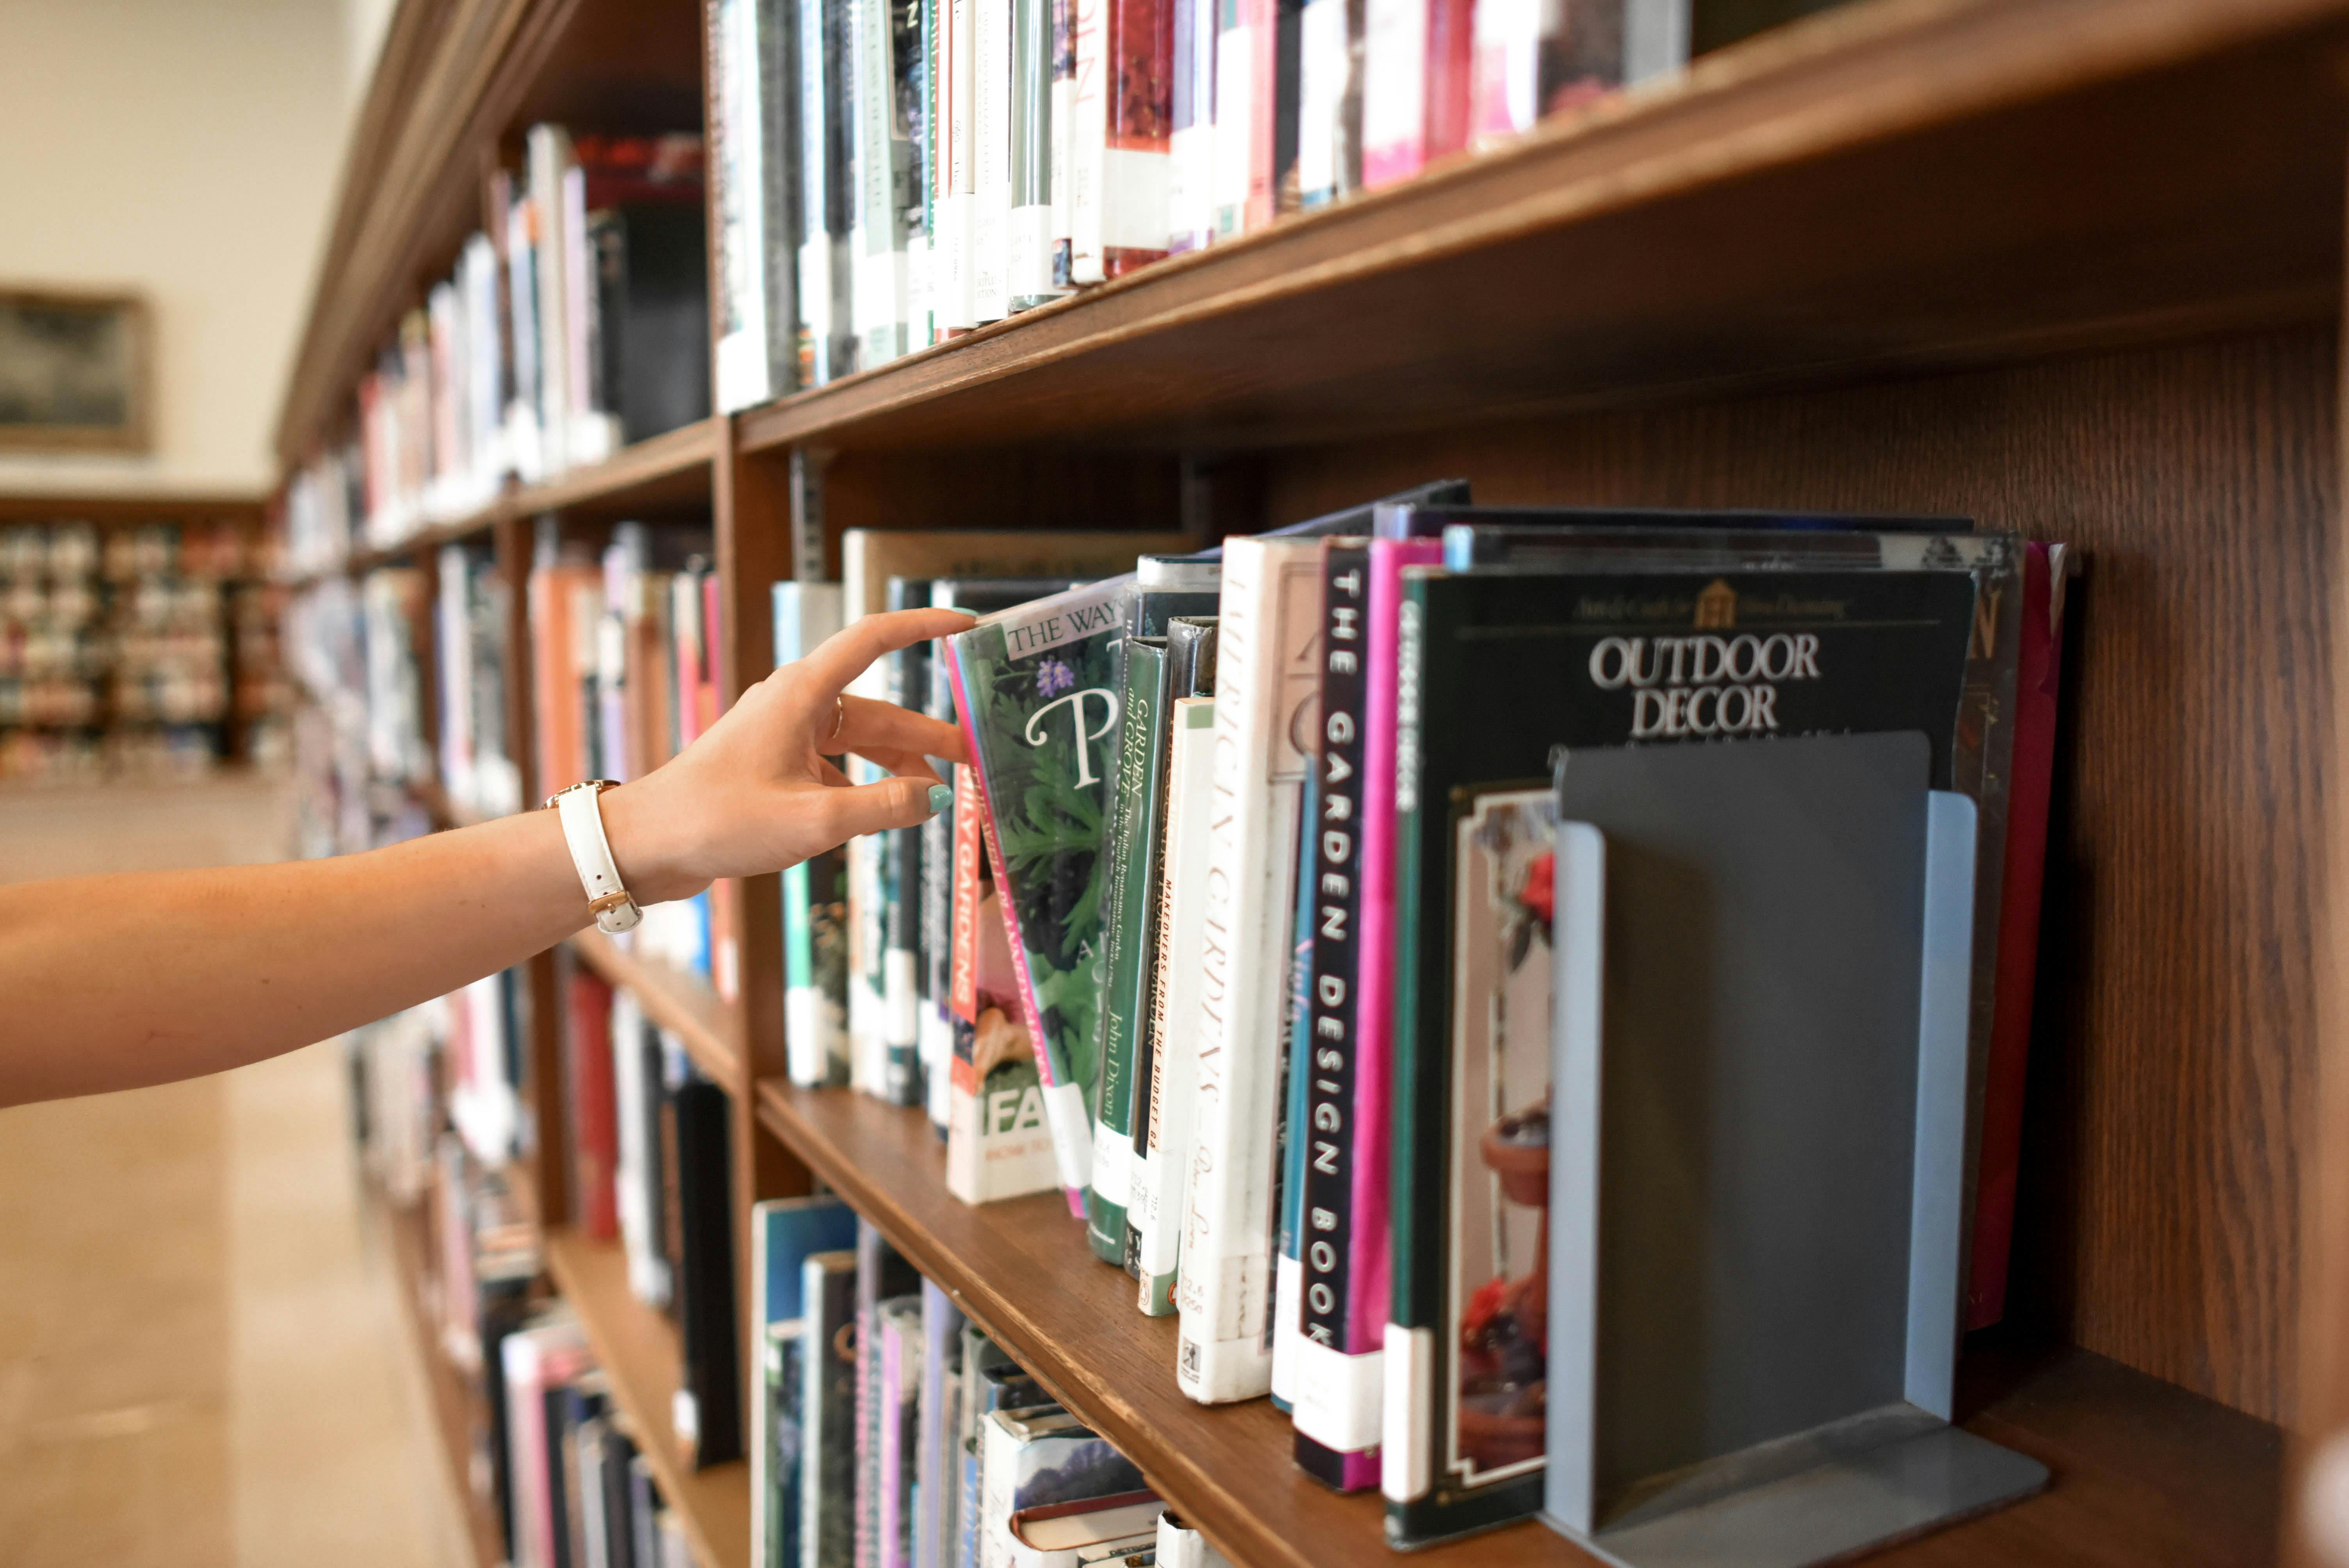 Hand reaching out to grab a book from a library shelf. The hand is shown mid-grasp, fingers extended towards the spine of a book. In the background are rows of neatly organized books on wooden shelves, creating a warm and inviting atmosphere. This is set as a real world example of how taxonomy and ontology enhance discoverability.